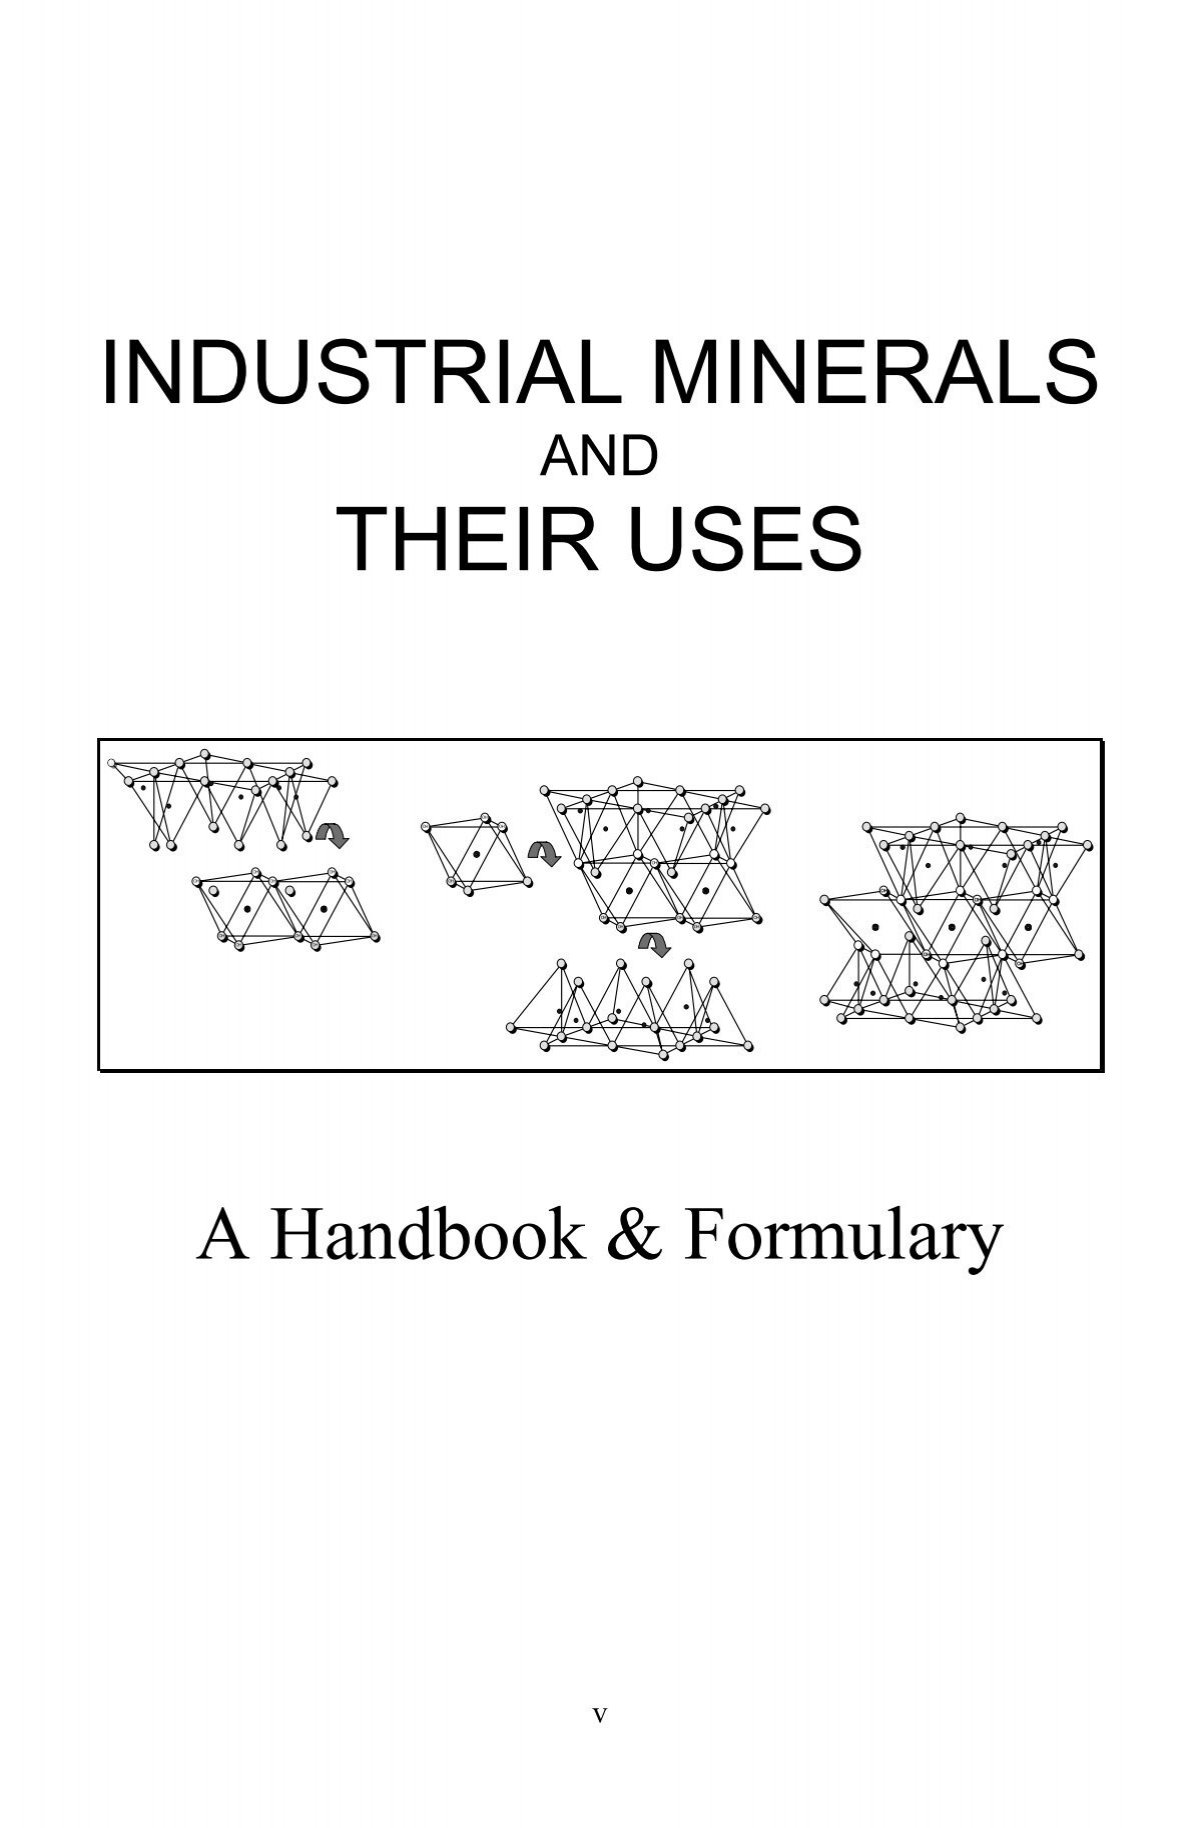 INDUSTRIAL MINERALS THEIR USES